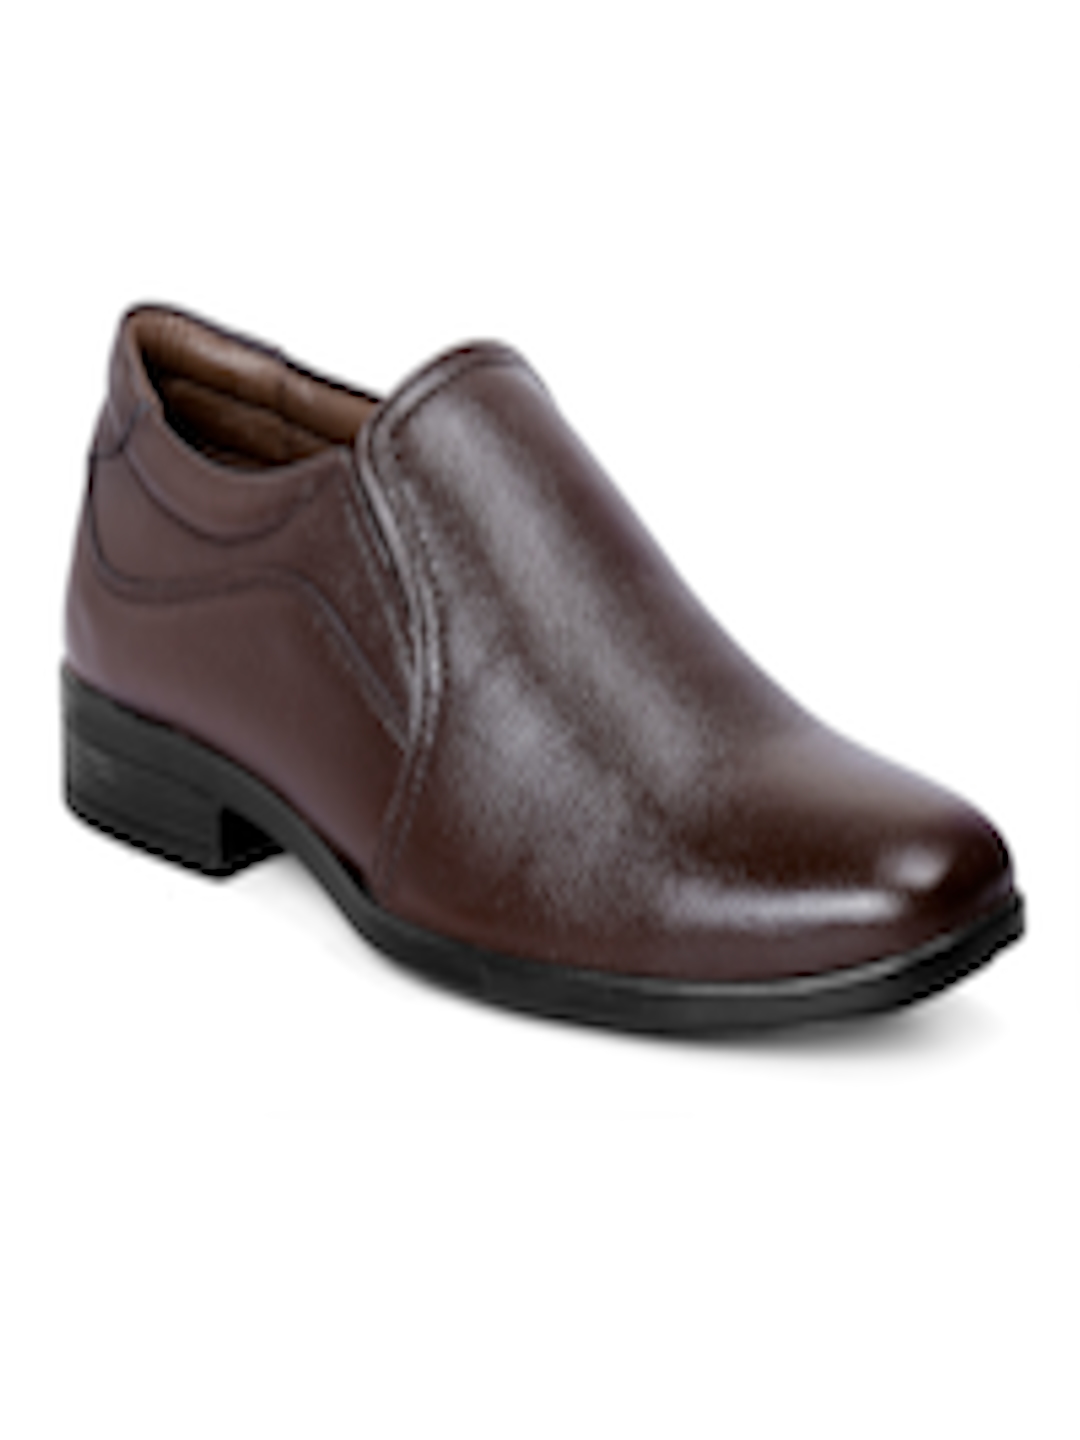 Buy Bacca Bucci Men Brown Leather Formal Slip On Shoes - Formal Shoes ...